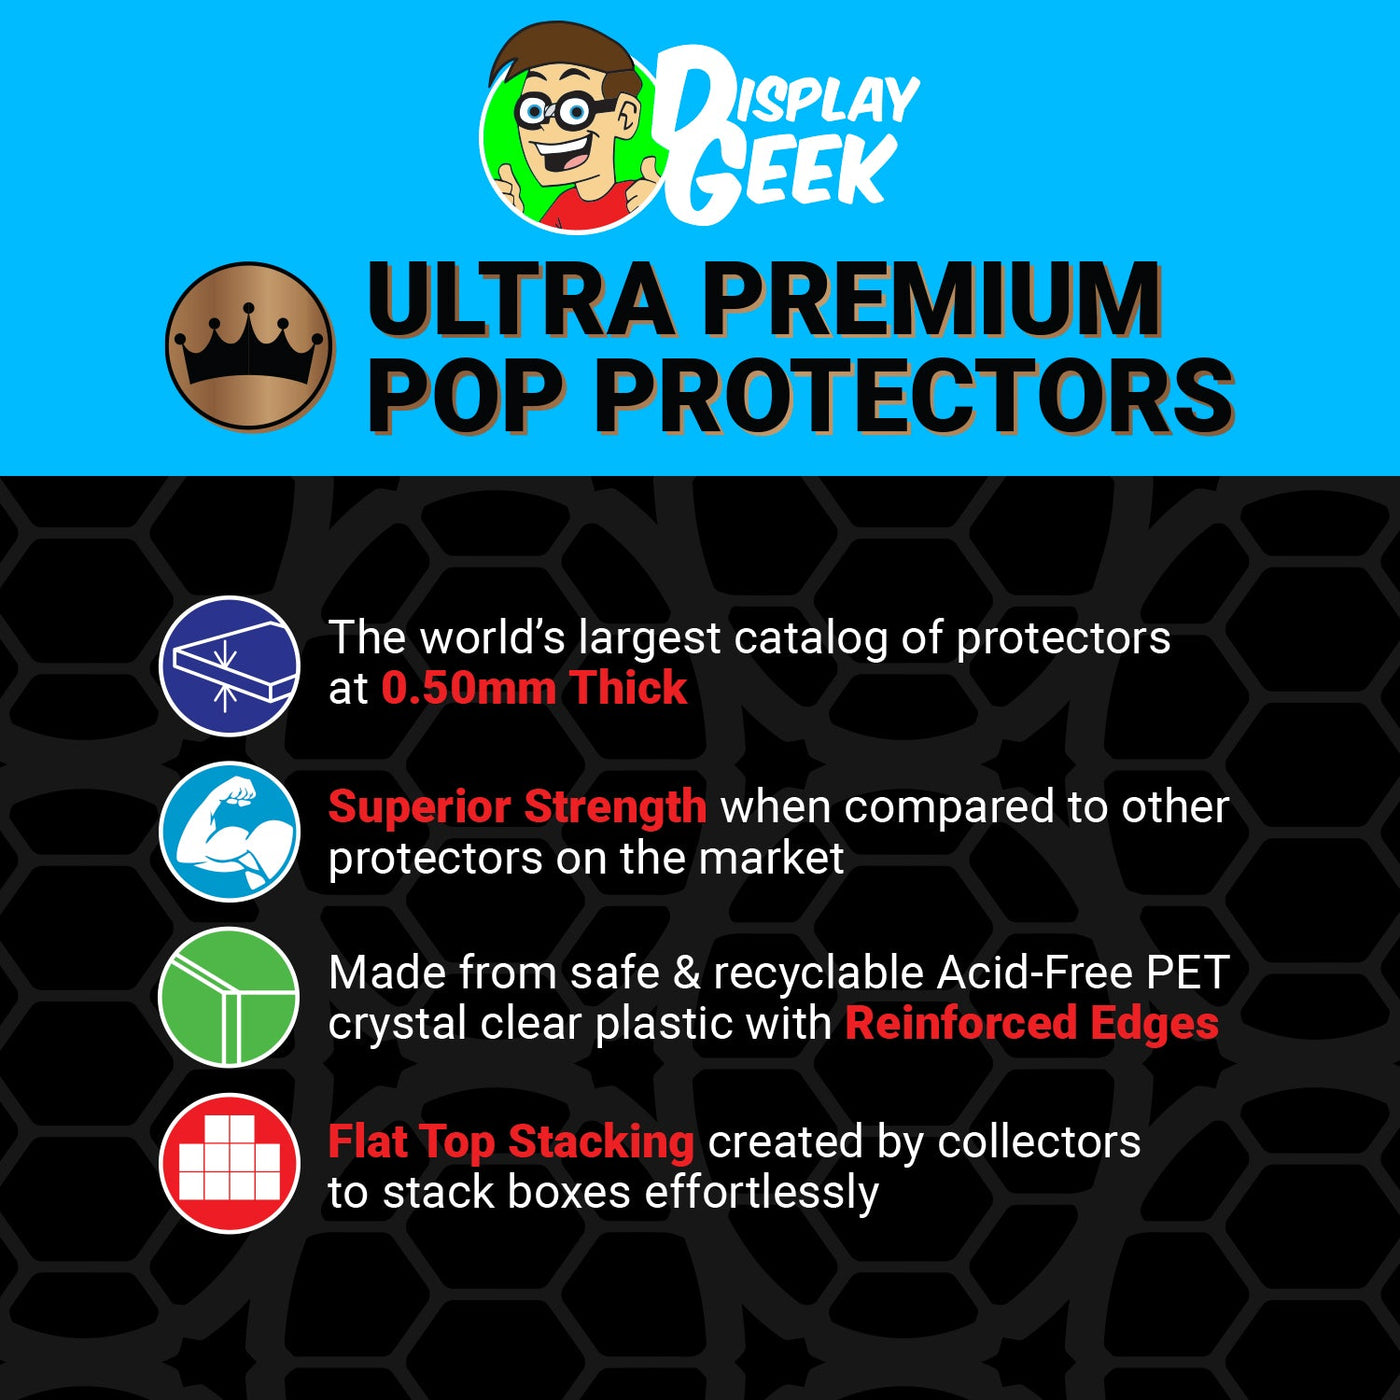 Pop Protector for Freddy Funko as Batman Blue SDCC LE 100 on The Protector Guide App by Display Geek